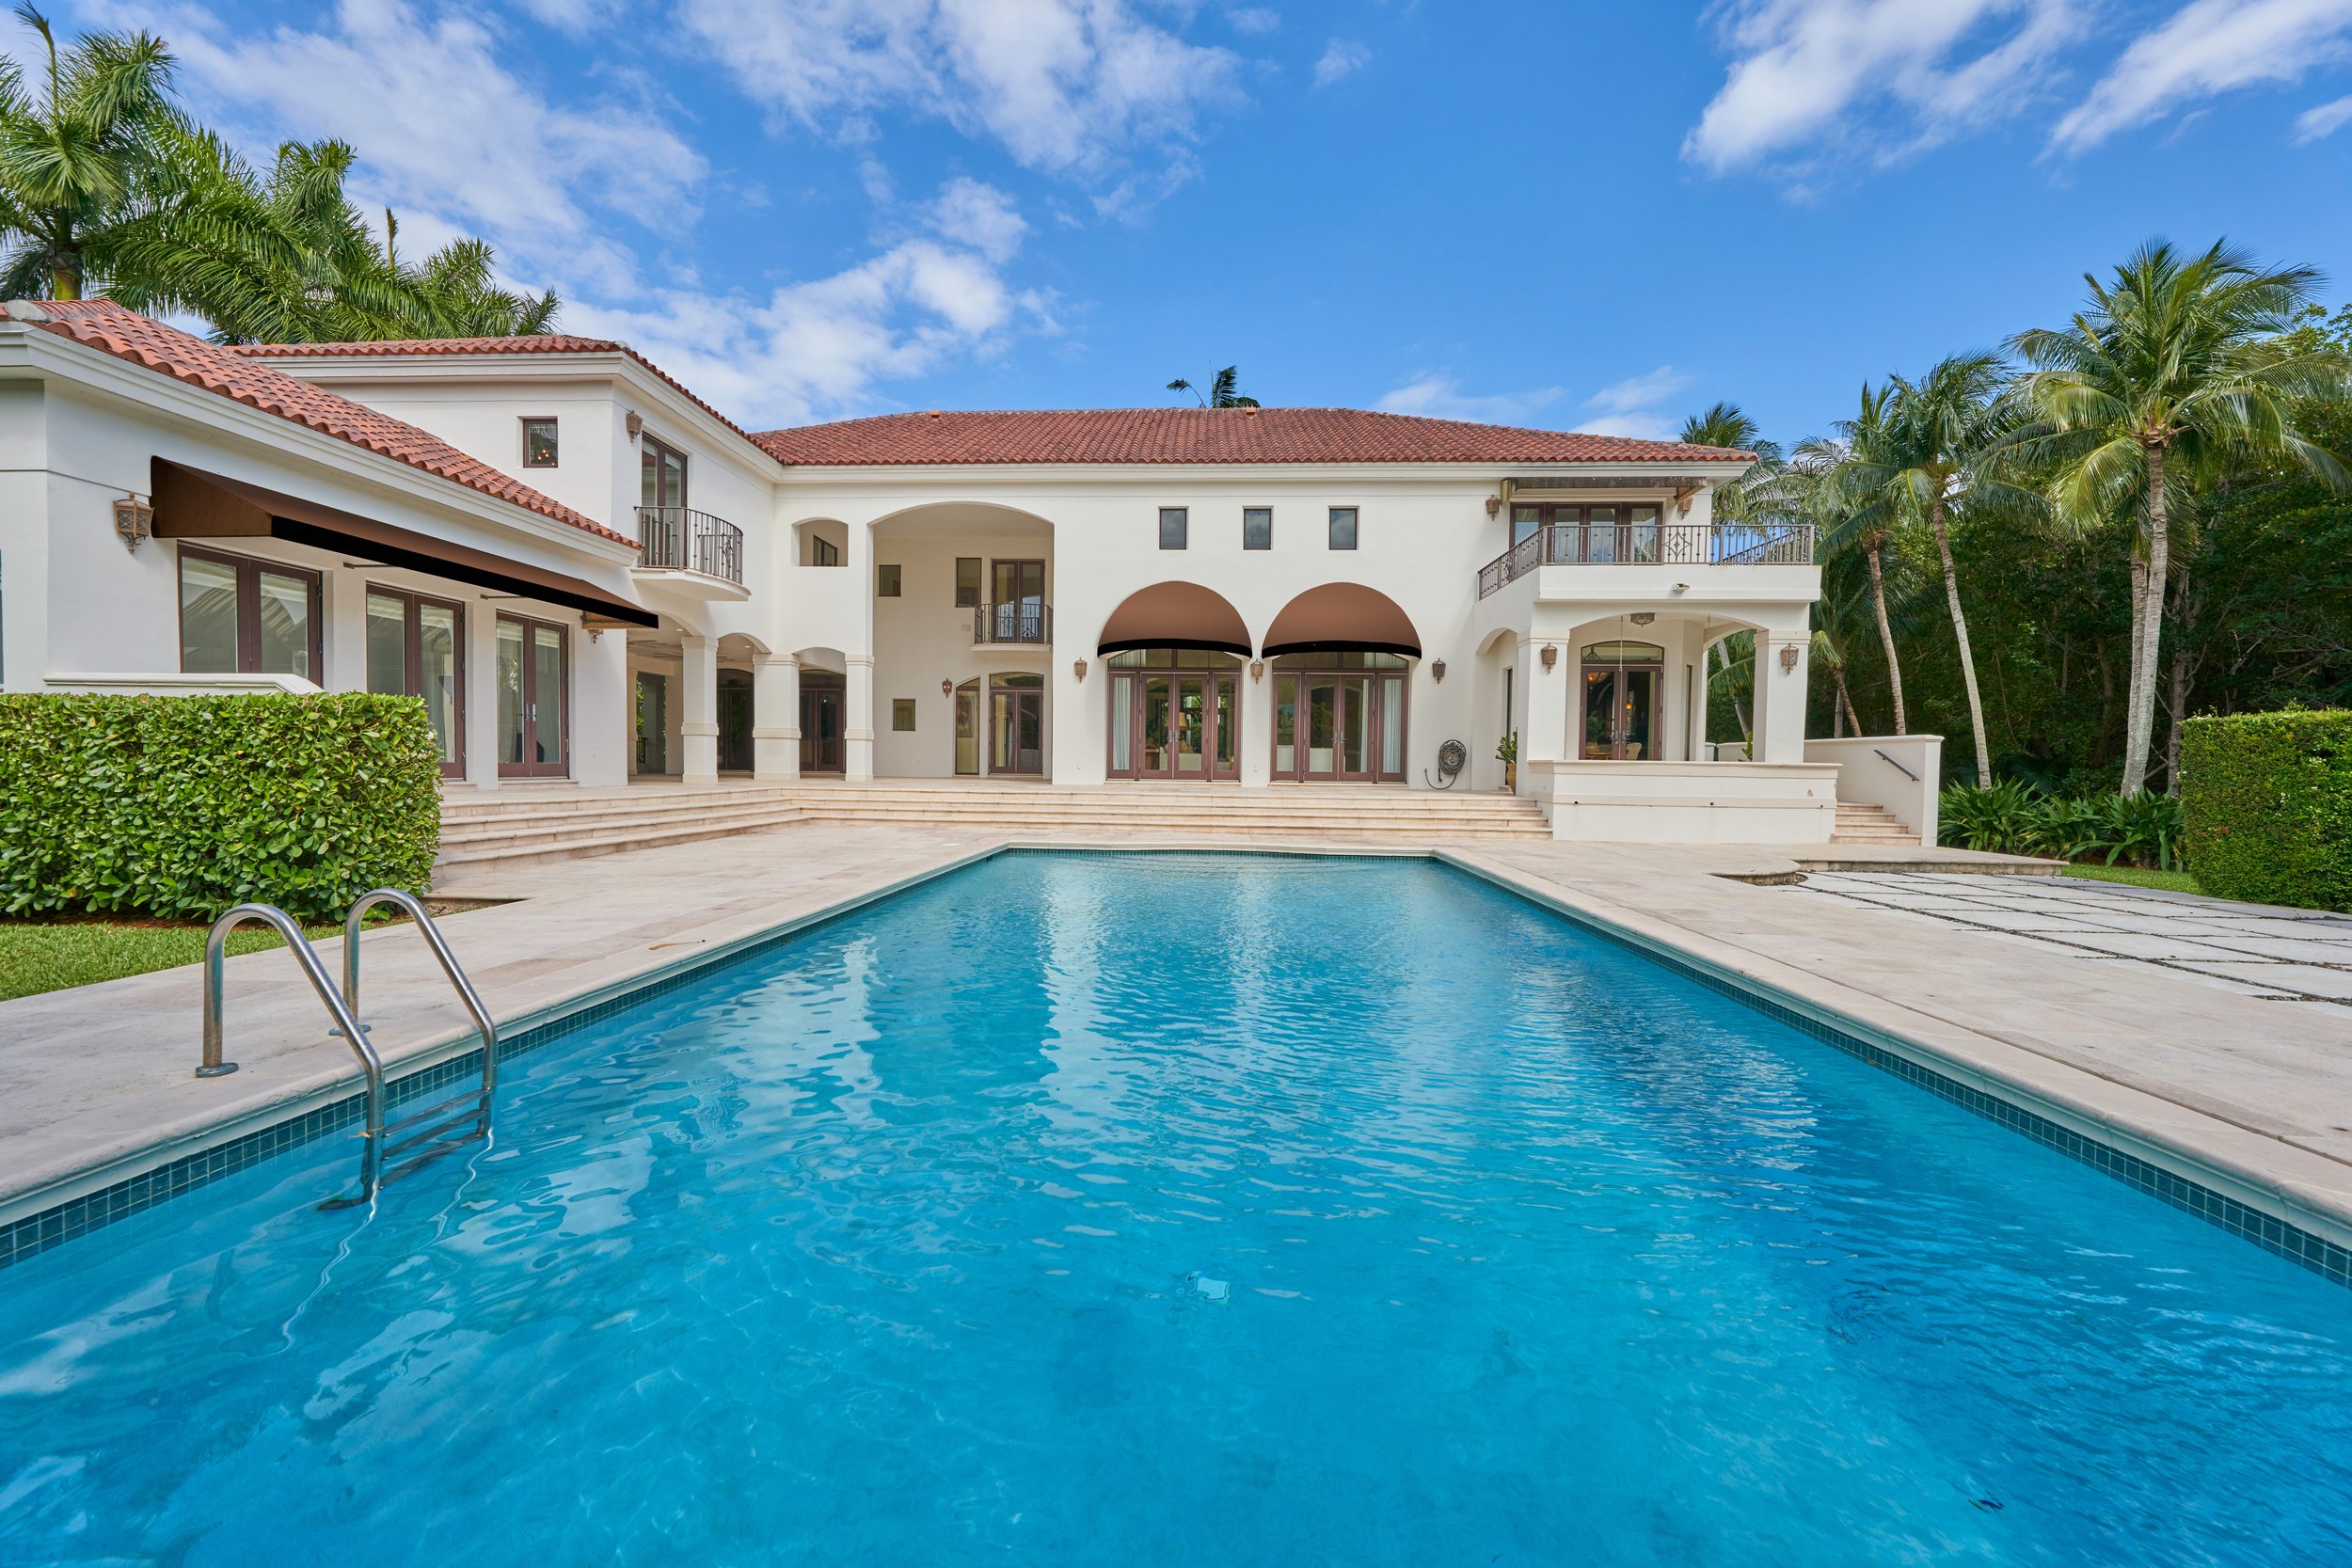 Step Inside This Coral Gables Mansion In The Exclusive Tahiti Beach Asking $12.9 Million 17.jpg